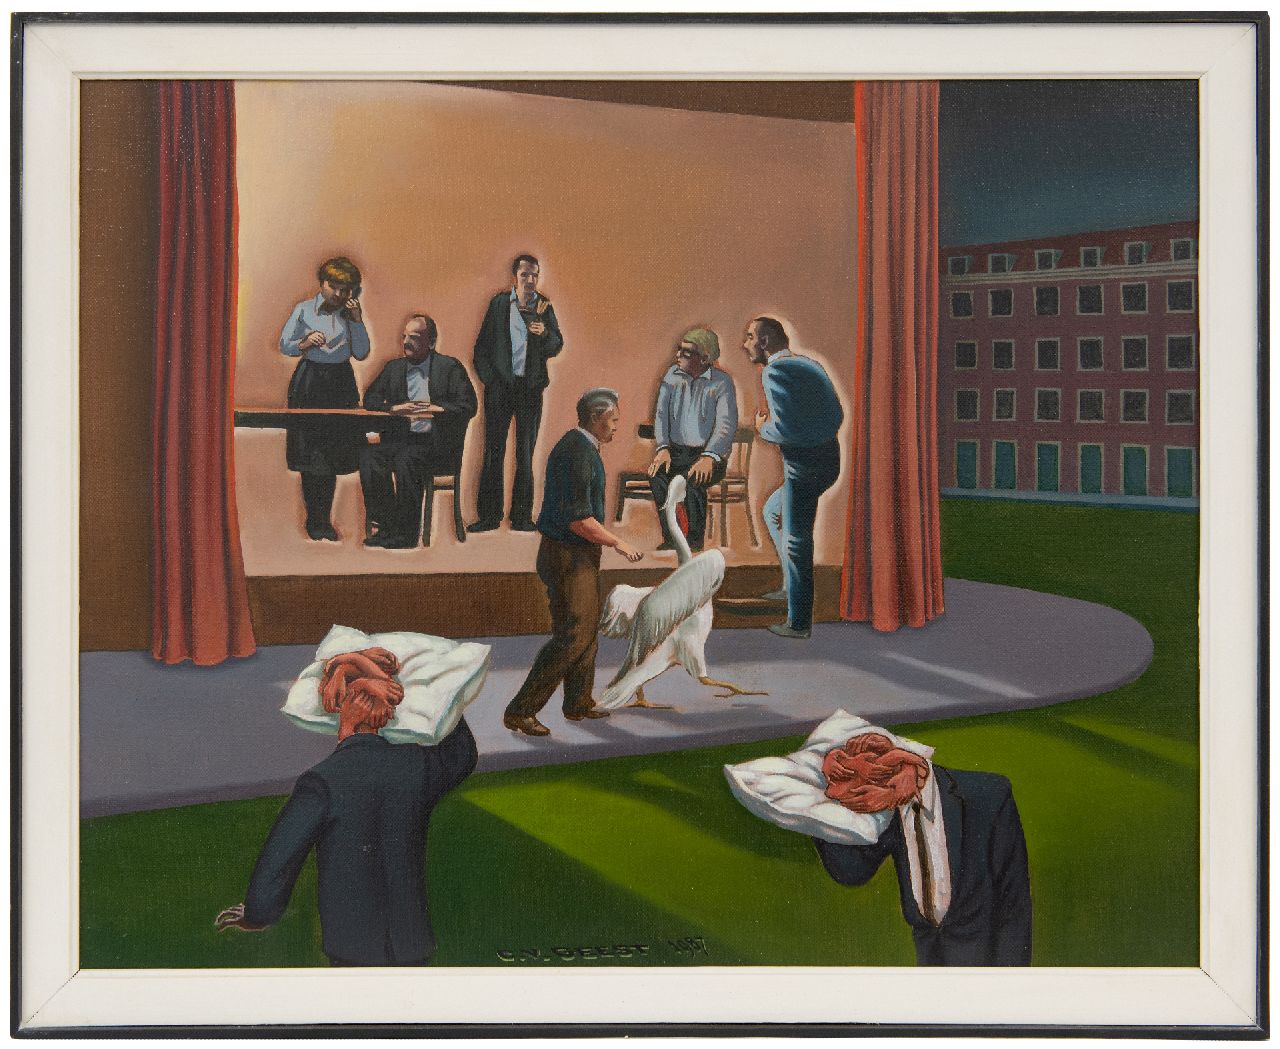 Geest C. van | Chris van Geest | Paintings offered for sale | The play, oil on canvas 40.3 x 50.1 cm, signed l.c. and dated 1987